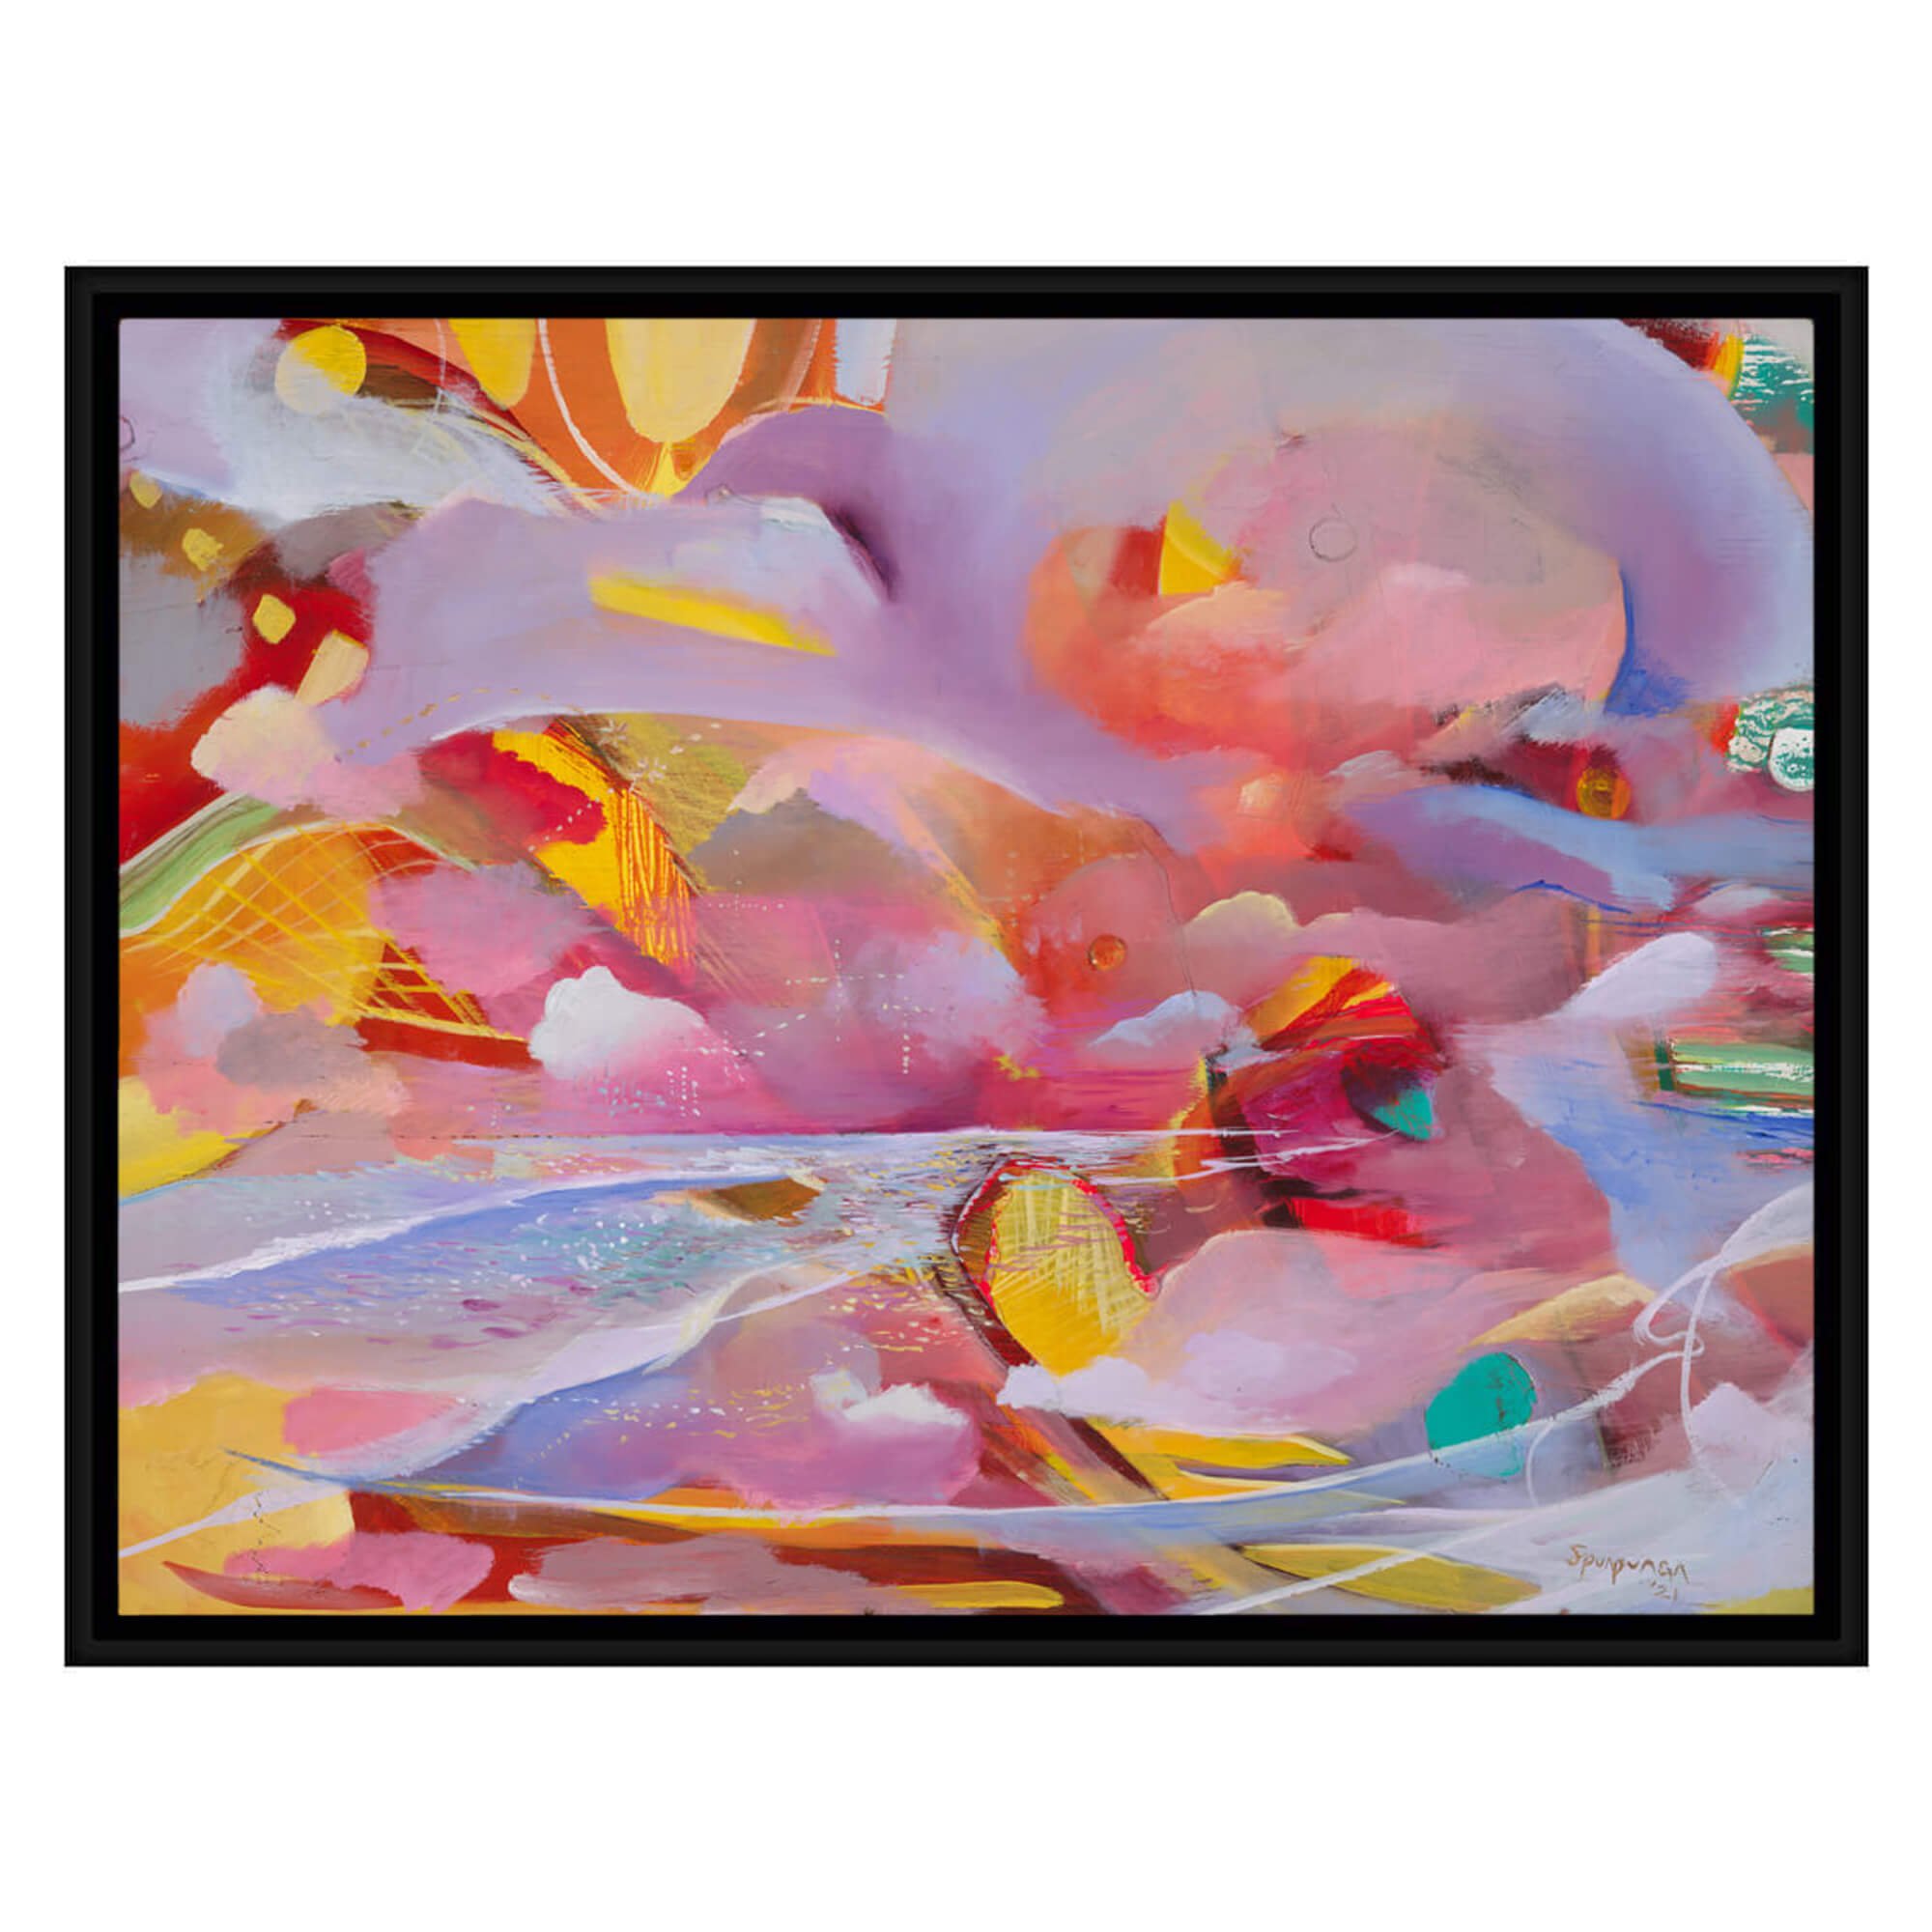 Framed canvas art print of a vibrant artwork that features the beach horizon with cotton candy colors by Hawaii artist Saumolia Puapuaga 